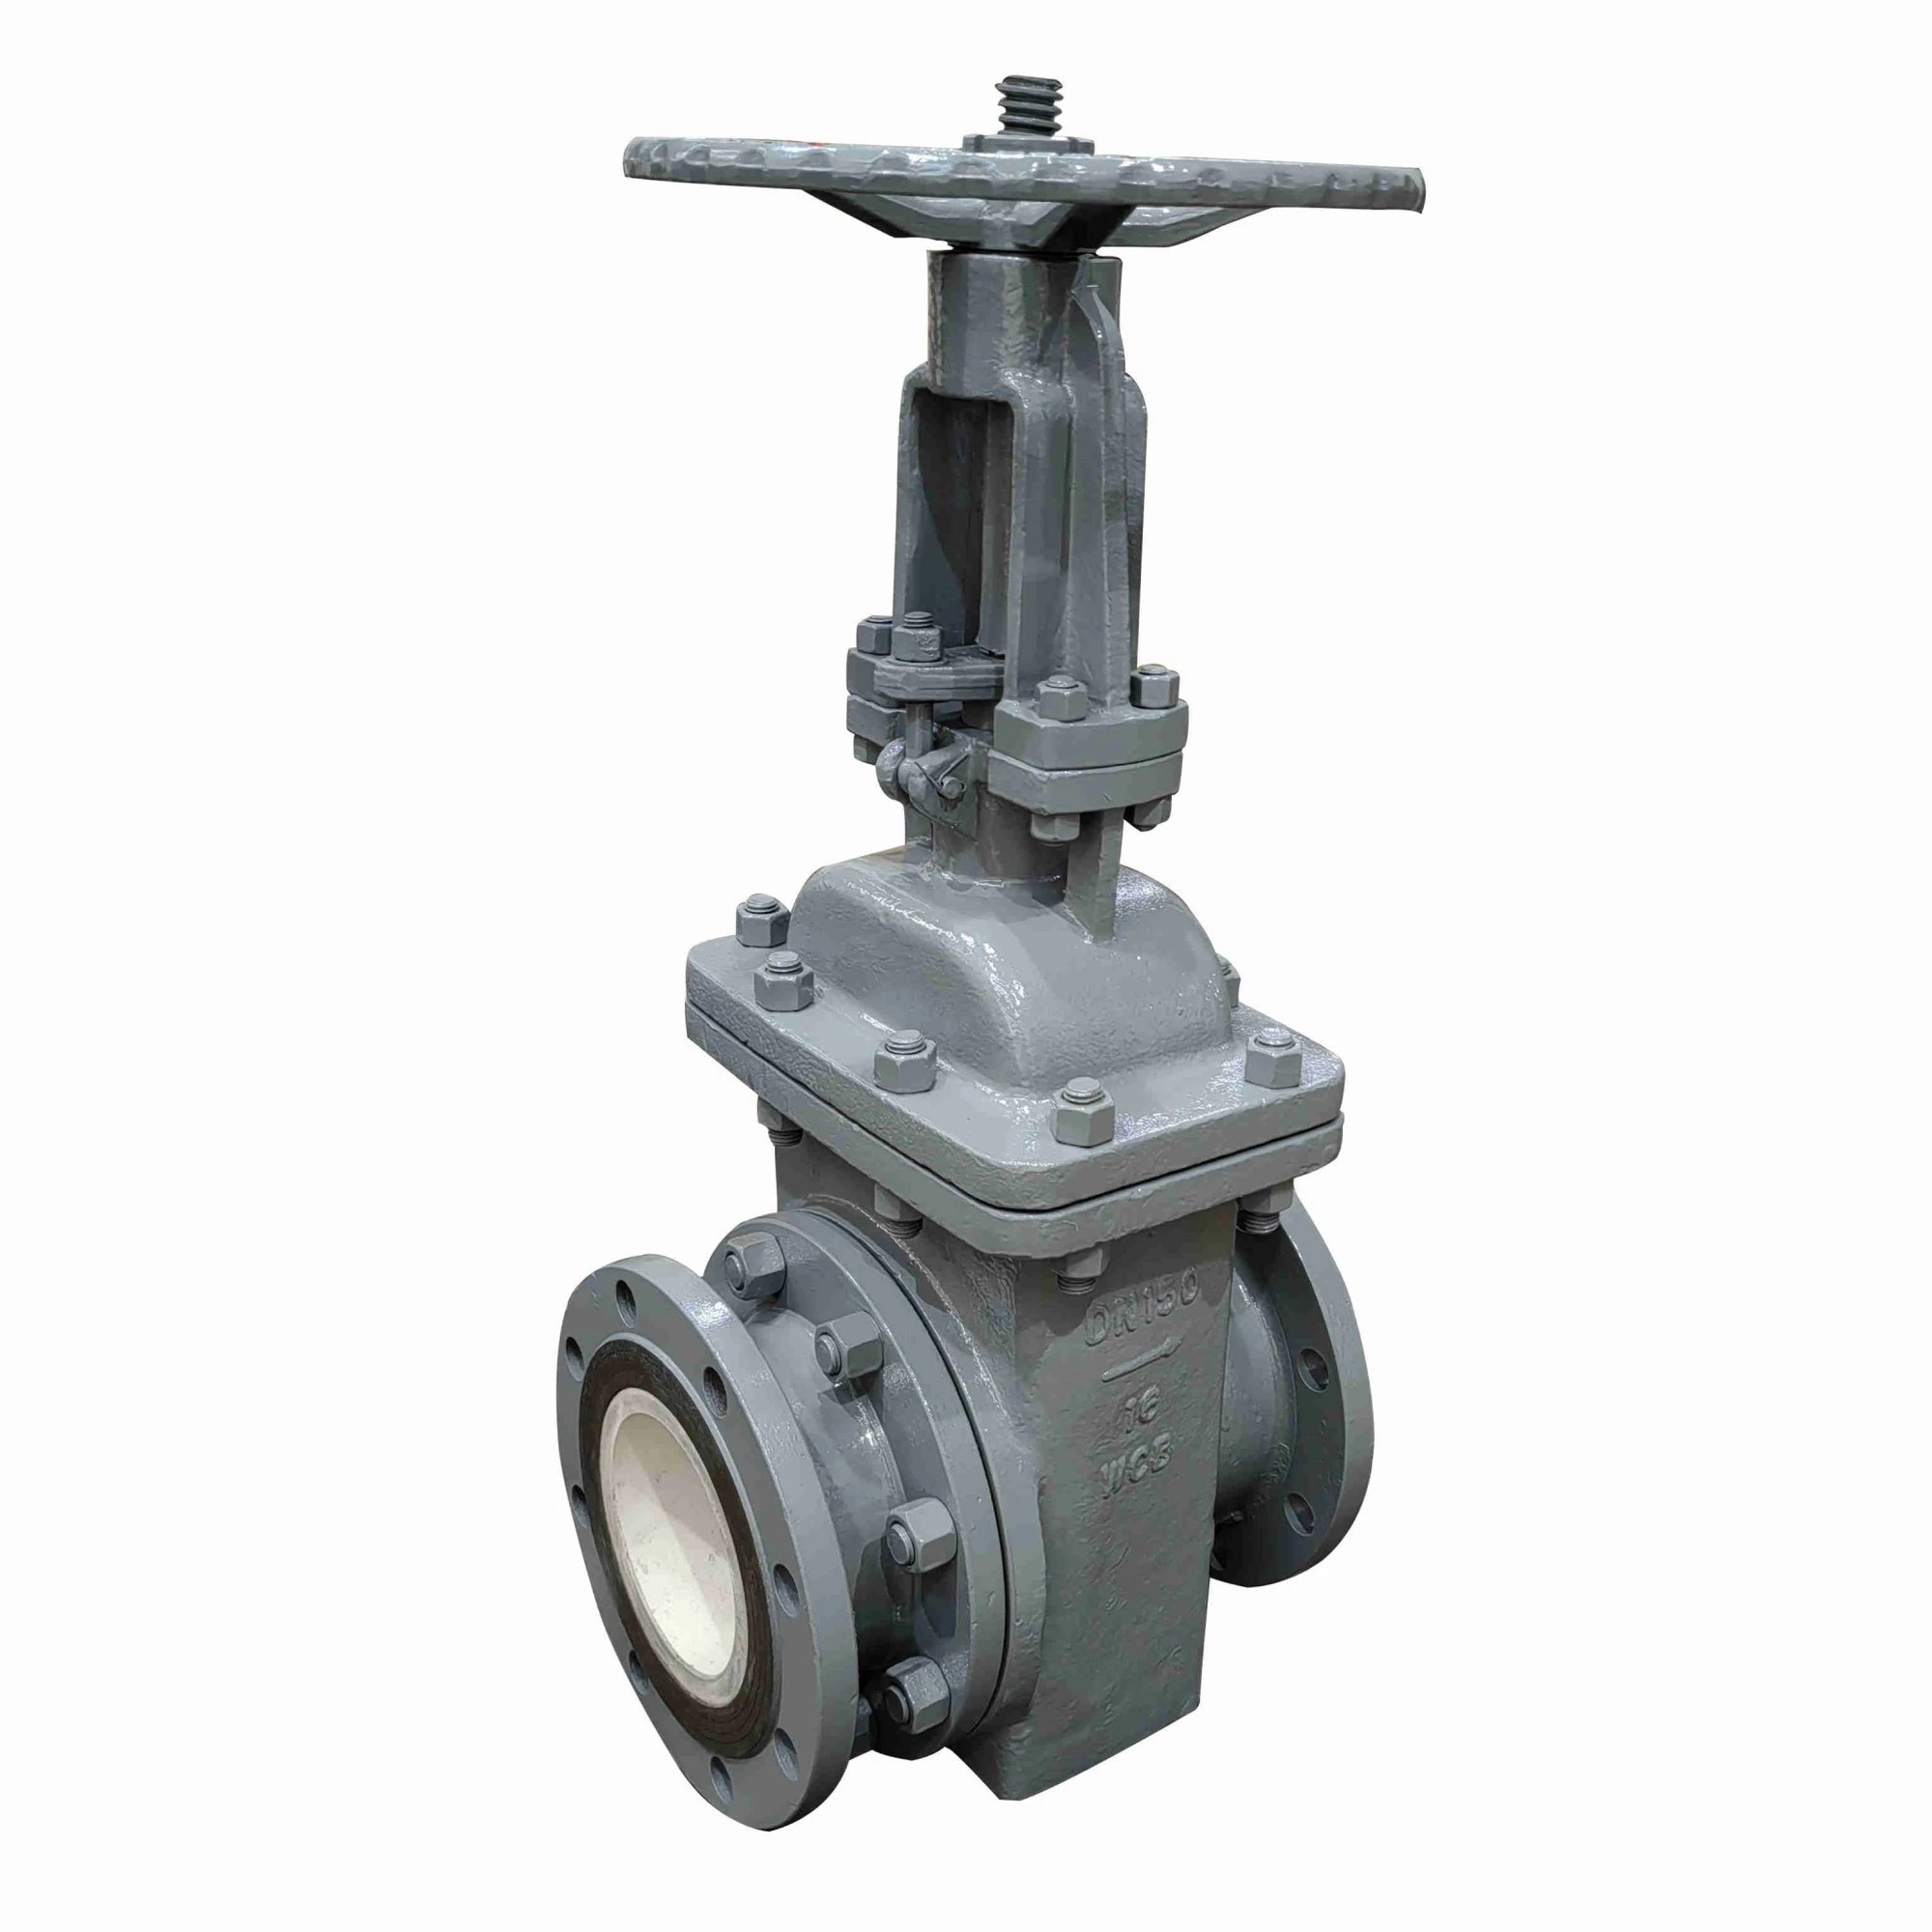 Residue Drainage Gate Valve, Ceramic Lined, WCB, 6 IN, 150 LB